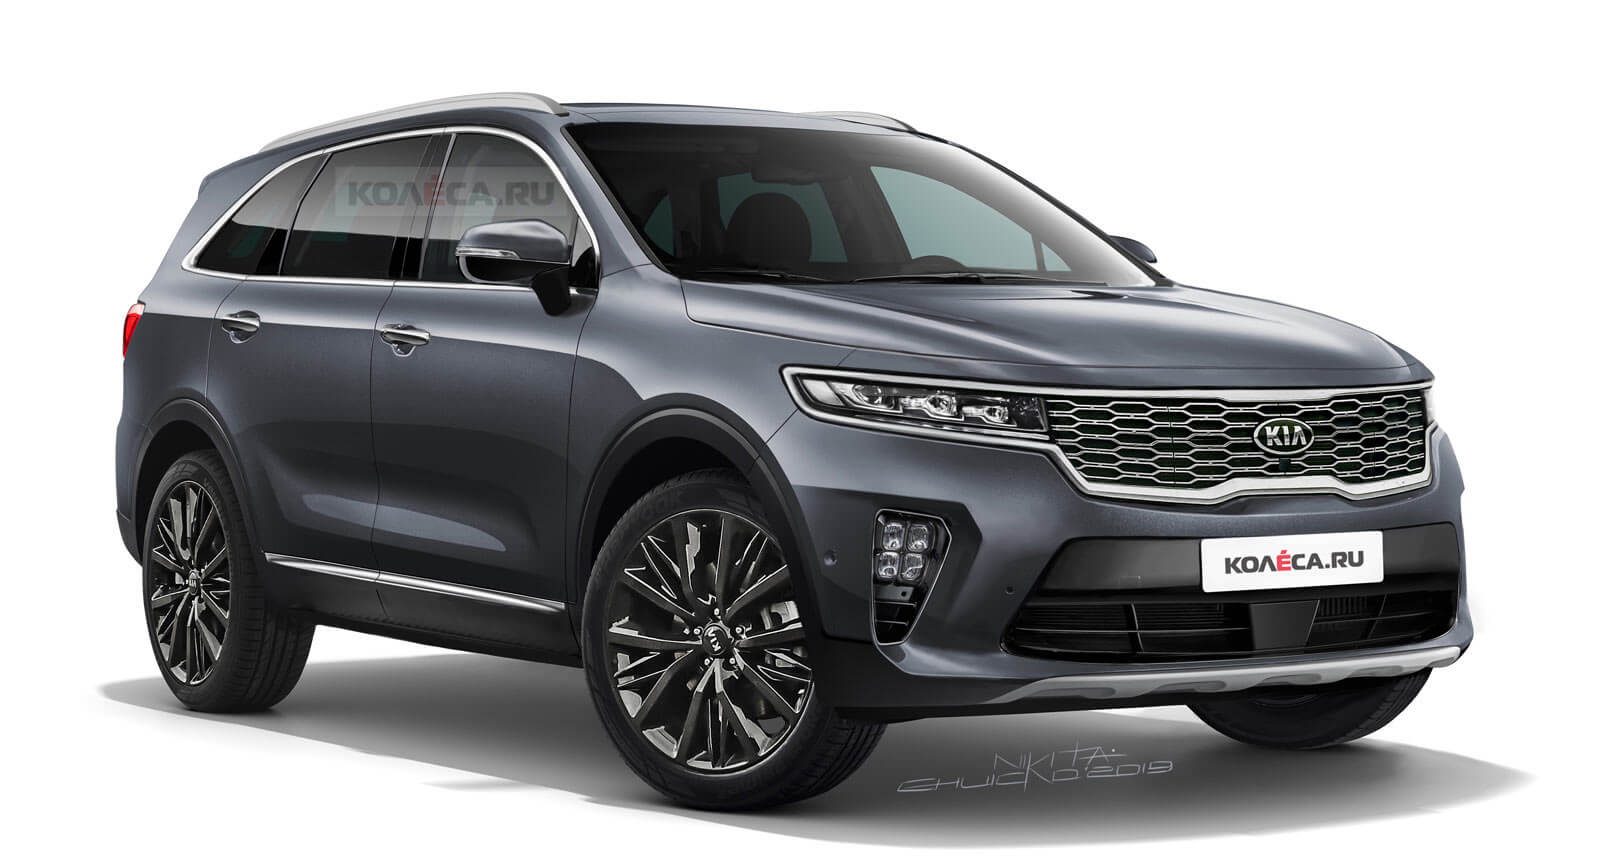 Here's A Realistic Render Of The New 2021 Kia Sorento | Carscoops